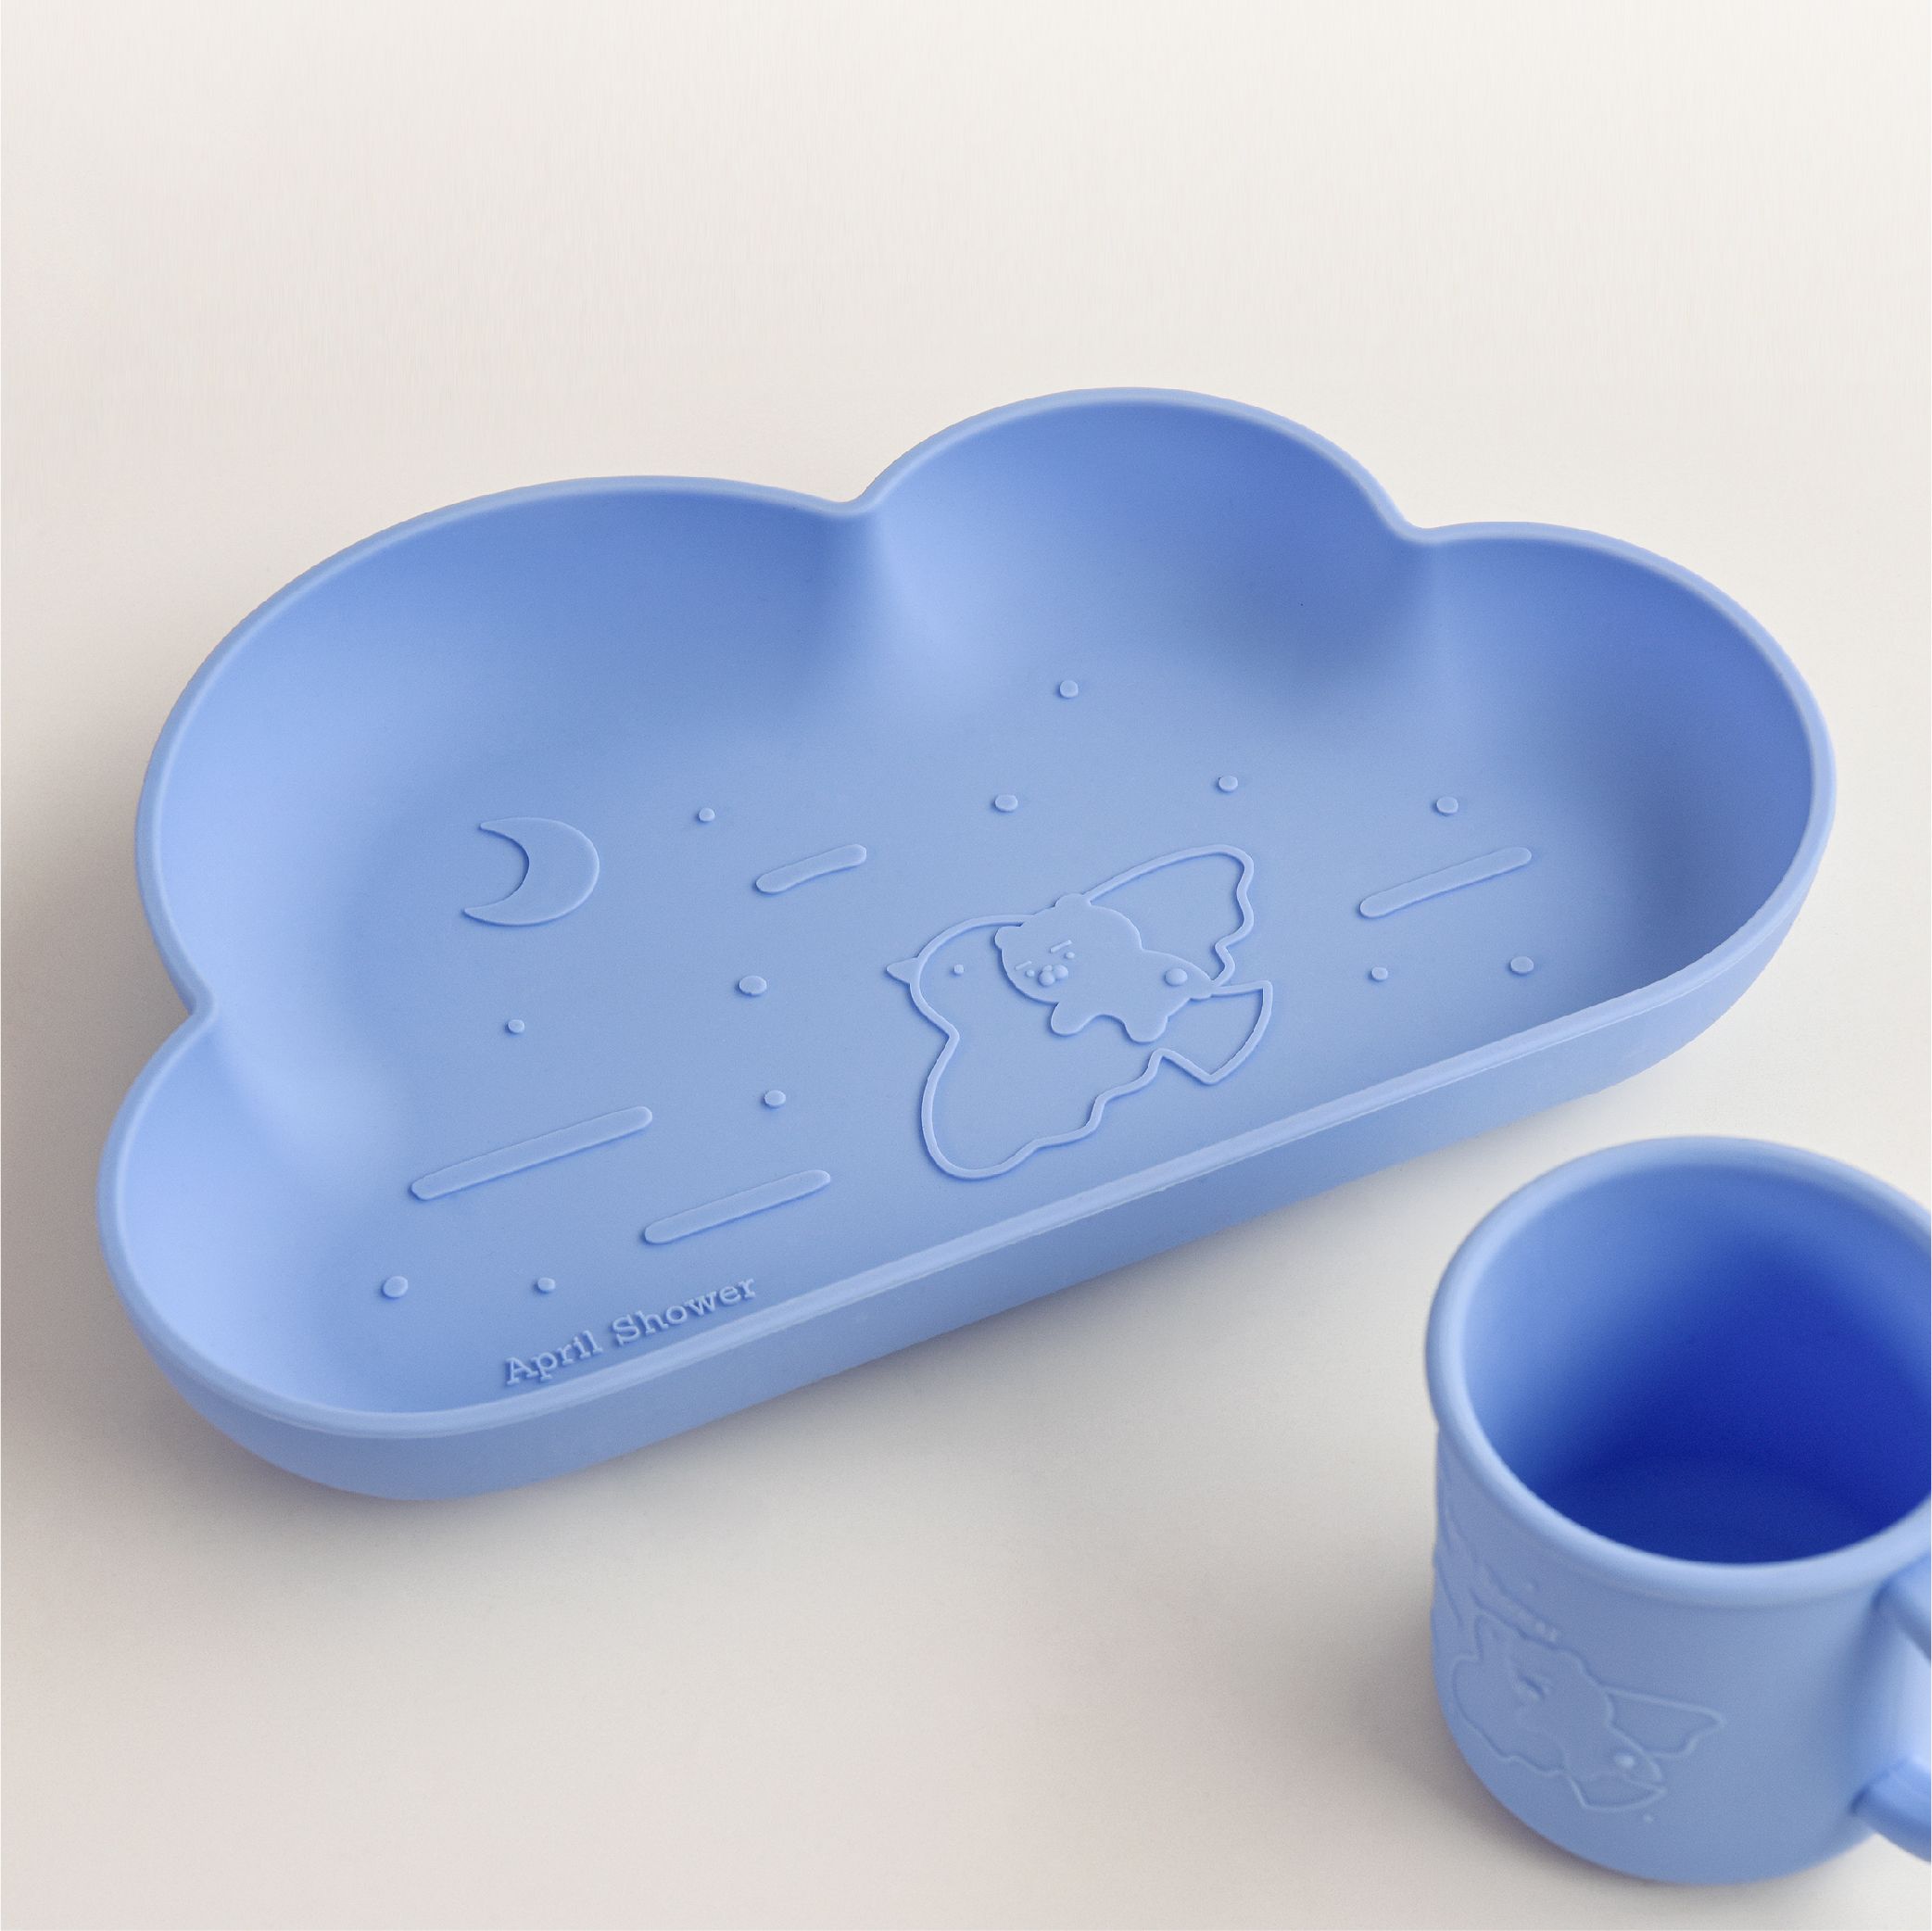 Kakao Friends April Shower RYAN in the night sky Silicon Tray